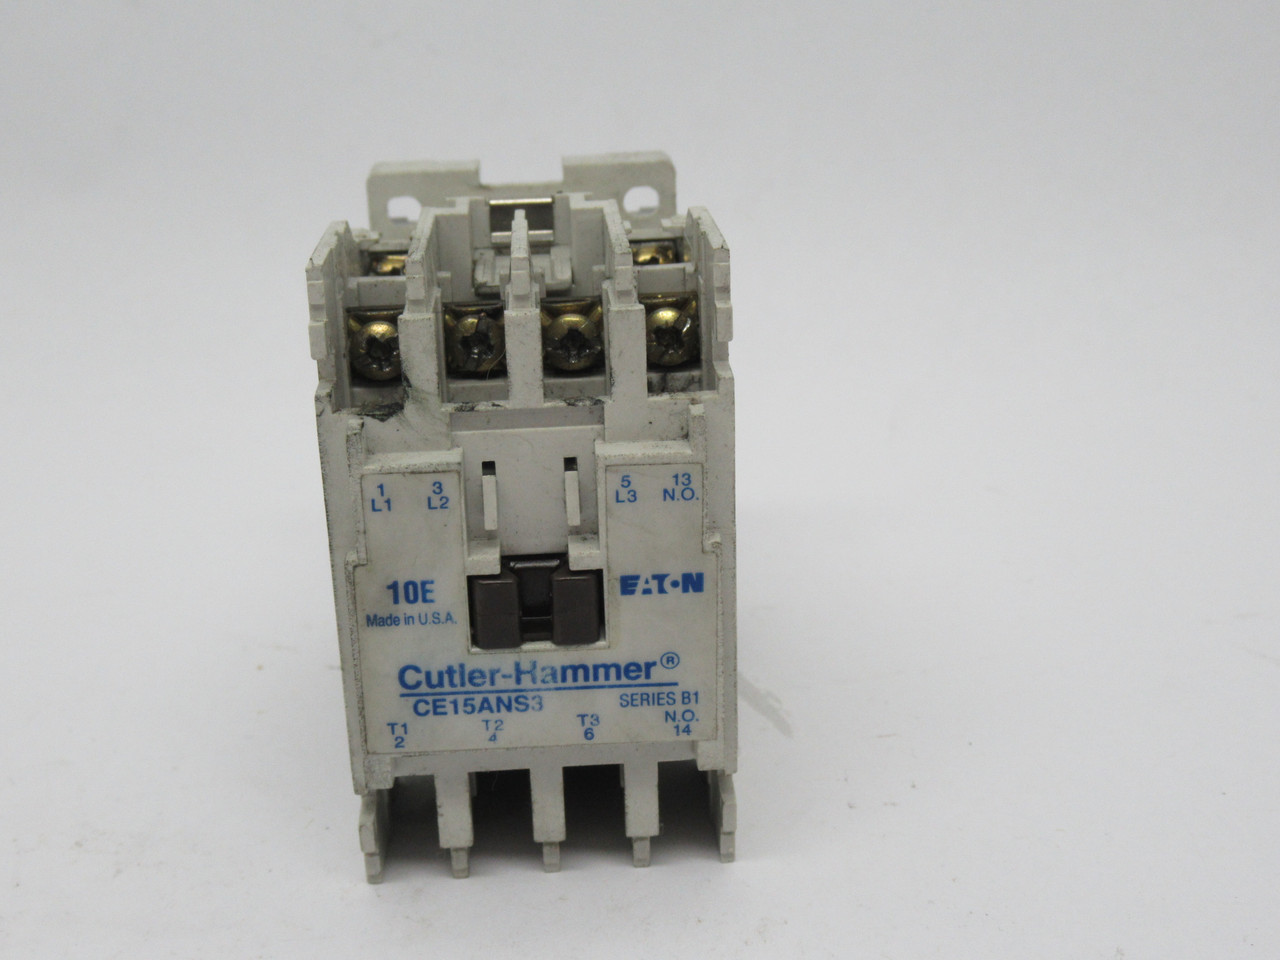 Cutler-Hammer CE15ANS3AB Contactor 110/120V 50/60Hz *Dirt* USED